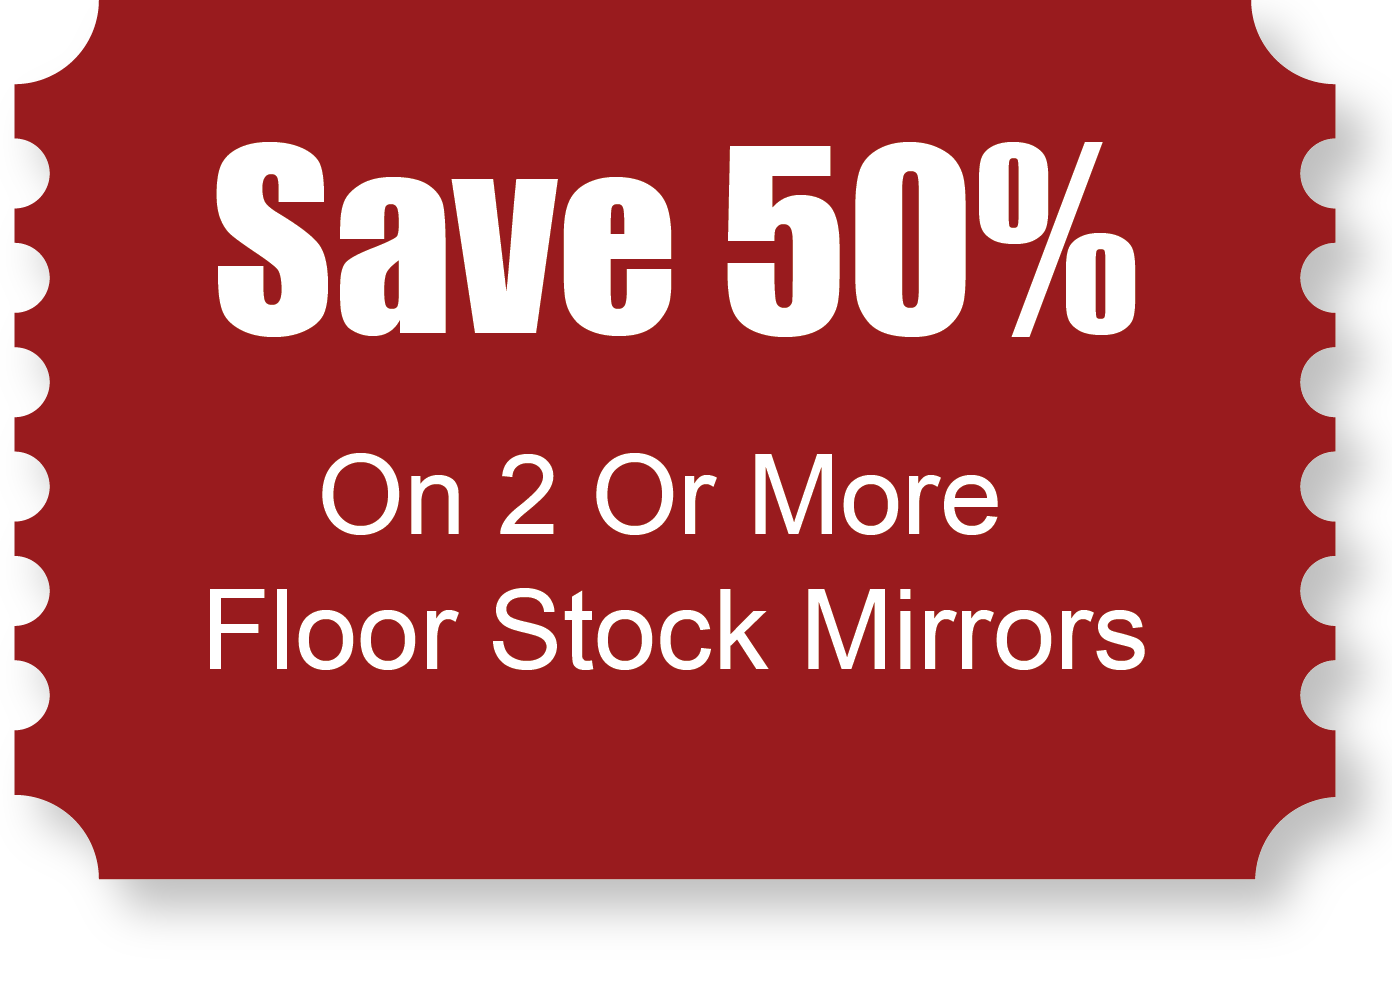 Save 50% On 2 Or More Floor Stock Mirrors